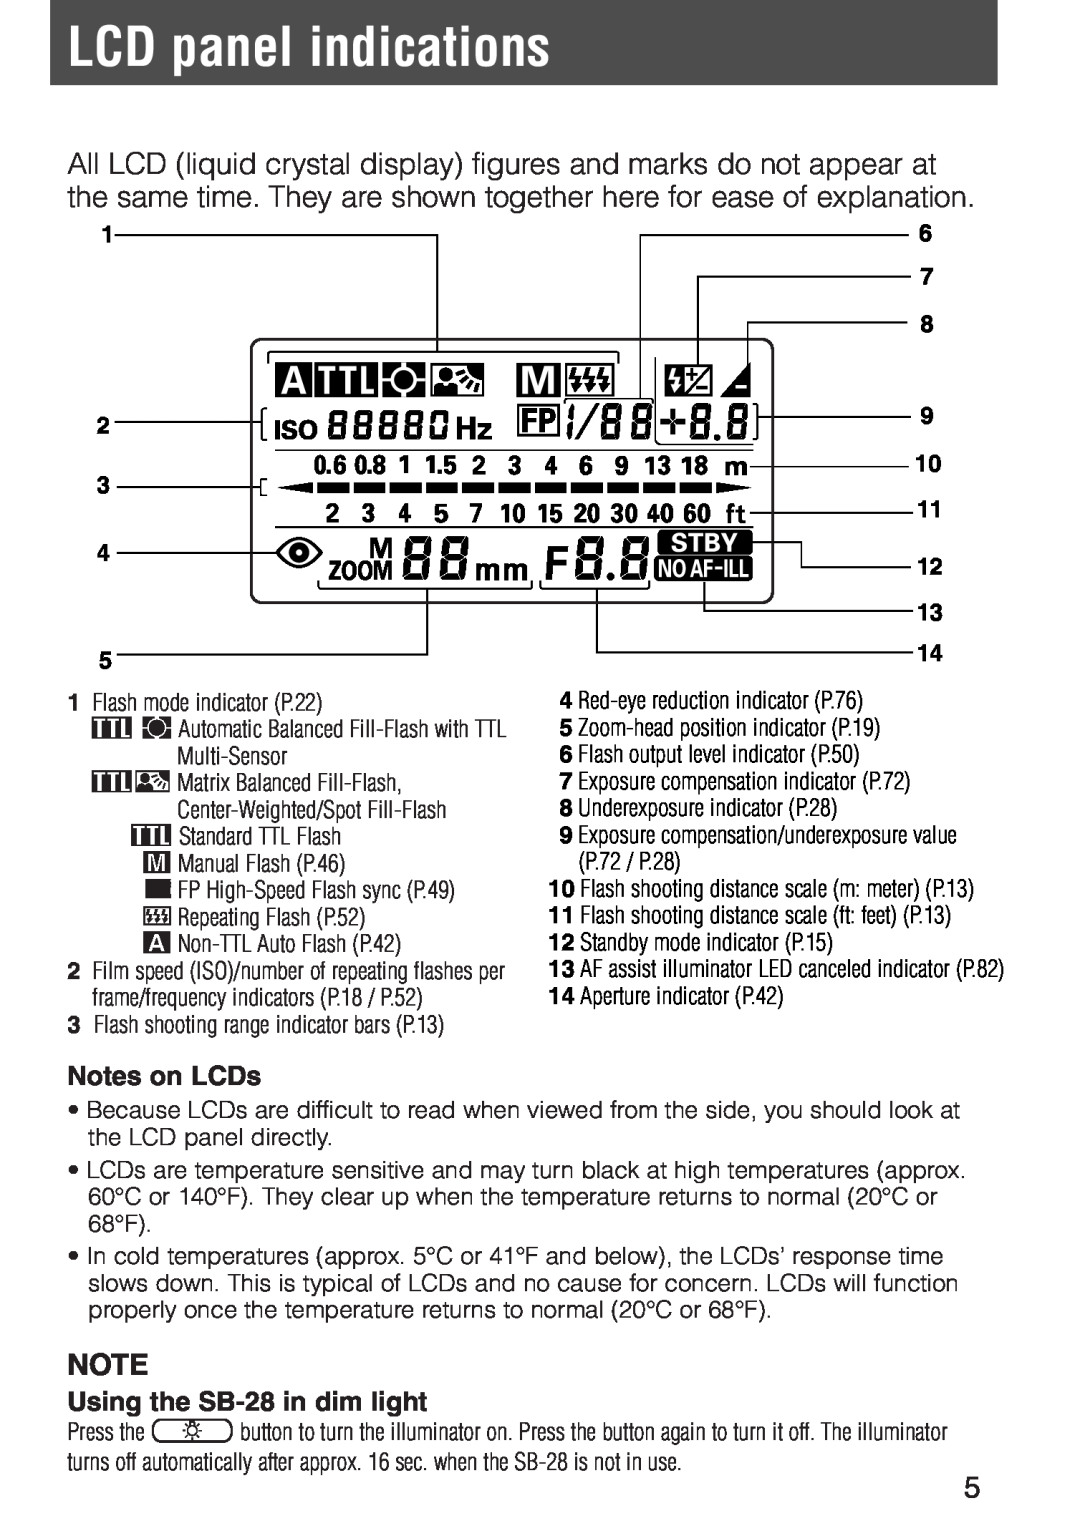 Nikon instruction manual LCD panel indications, Notes on LCDs, Using the SB-28in dim light, 2 3 4 5, 9 10 11 